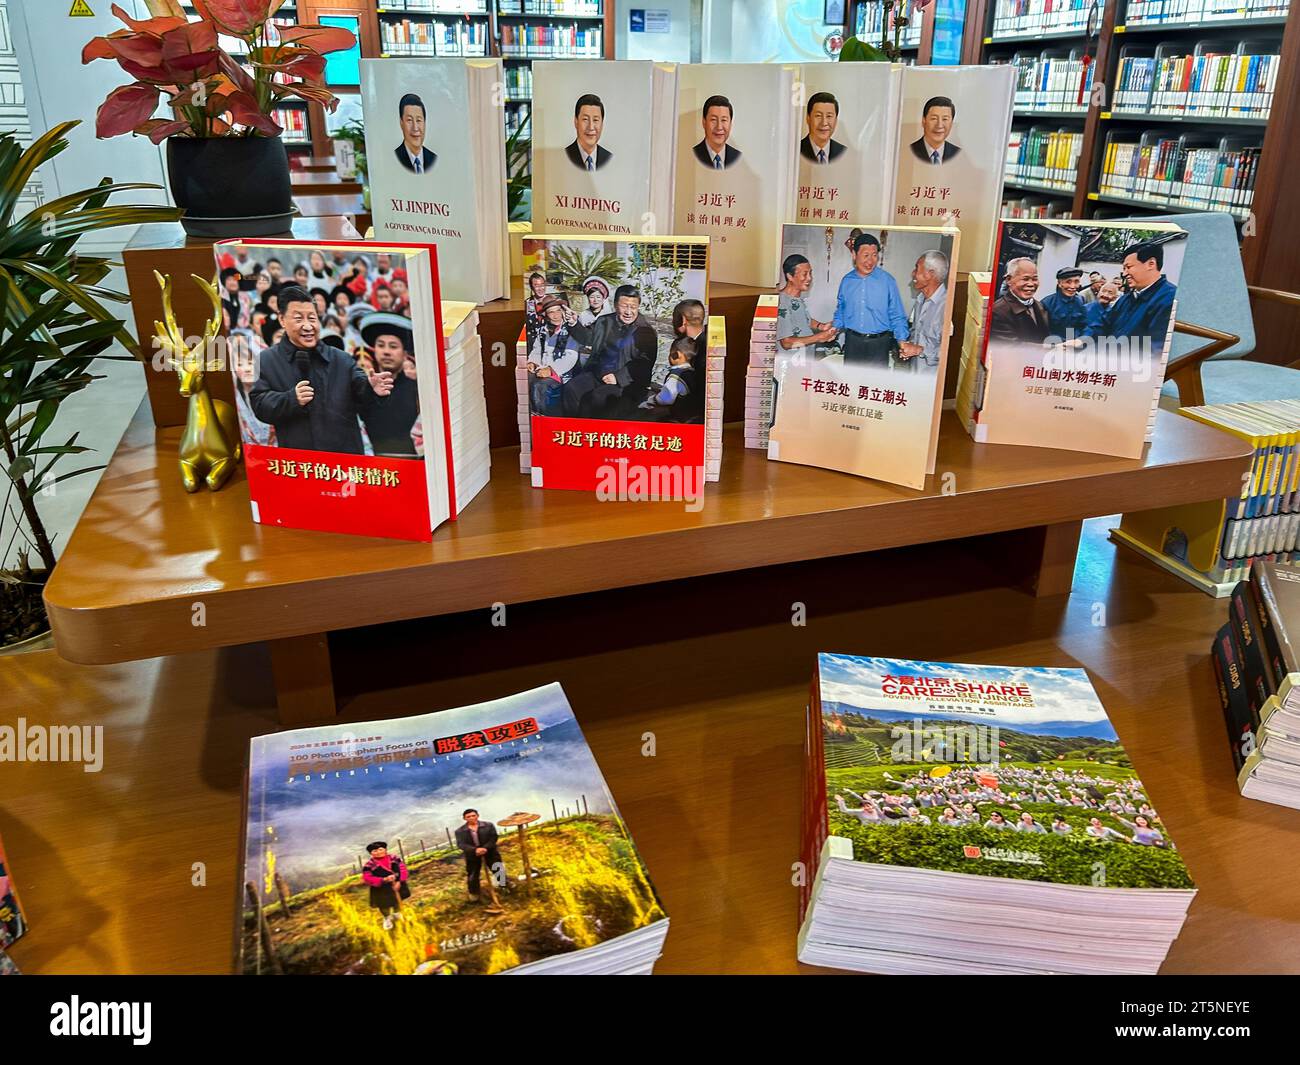 Beijing, China, inside display of Beijing Daxing International Airport, interior Chinese Bookstore, Capital Library of China, President Xi JINGPING, Books 'Xi Jinping's Thoughts on a Well-Off Society' Stock Photo